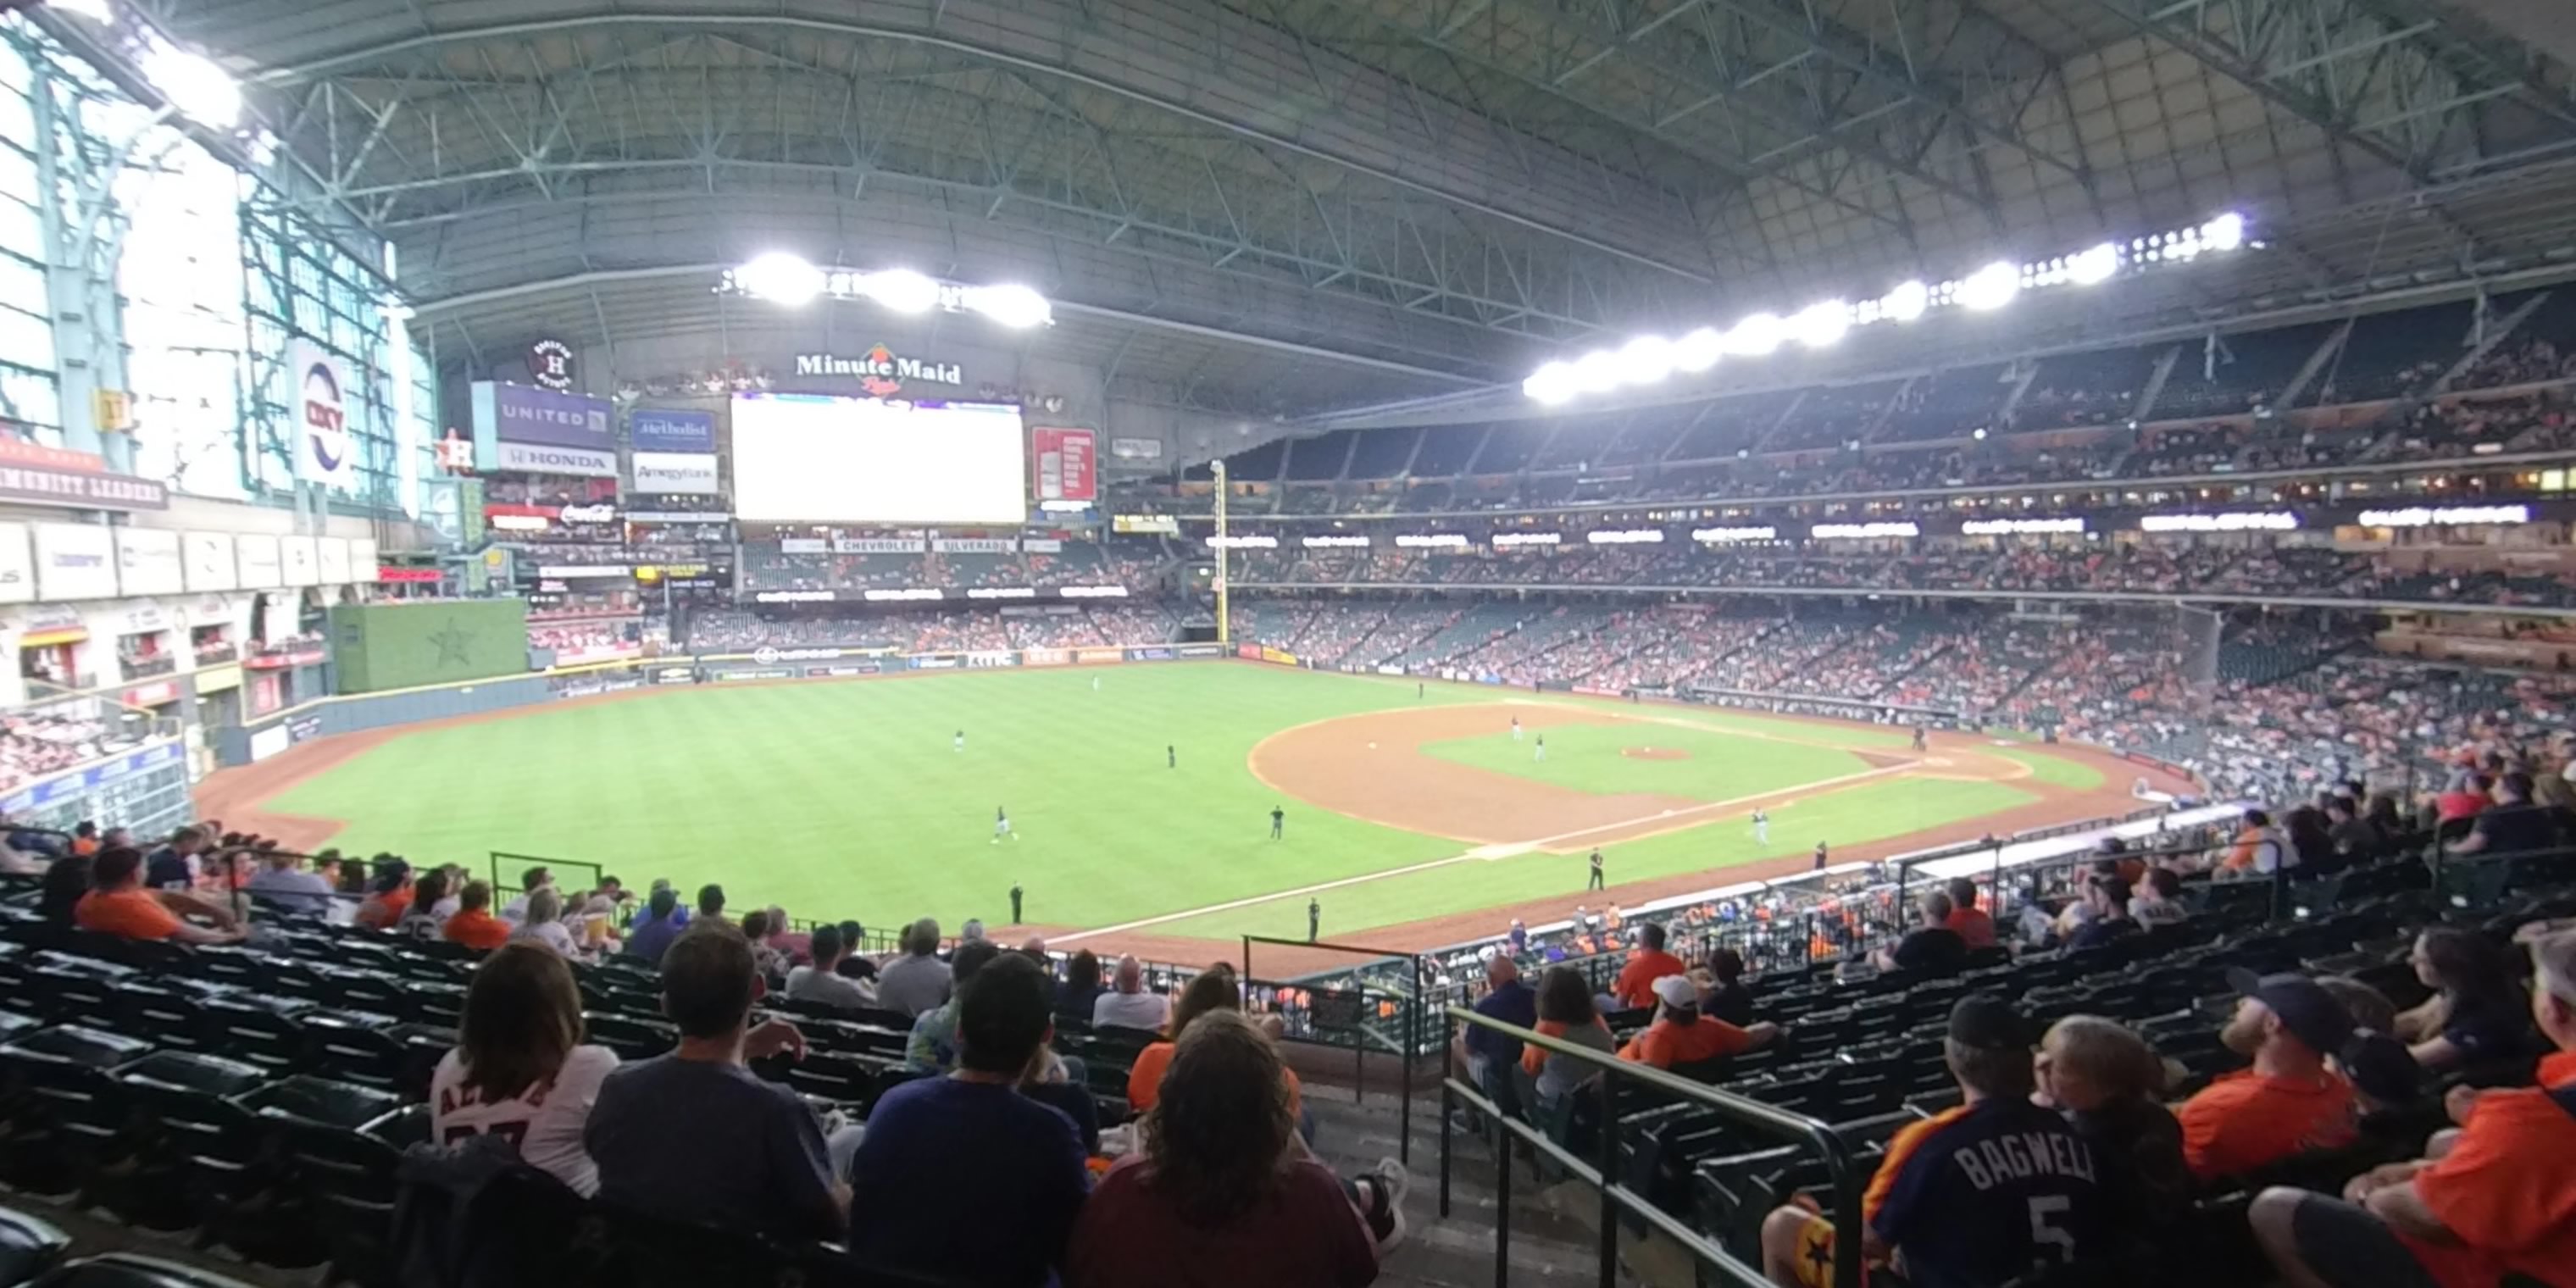 Section 207 at Minute Maid Park 